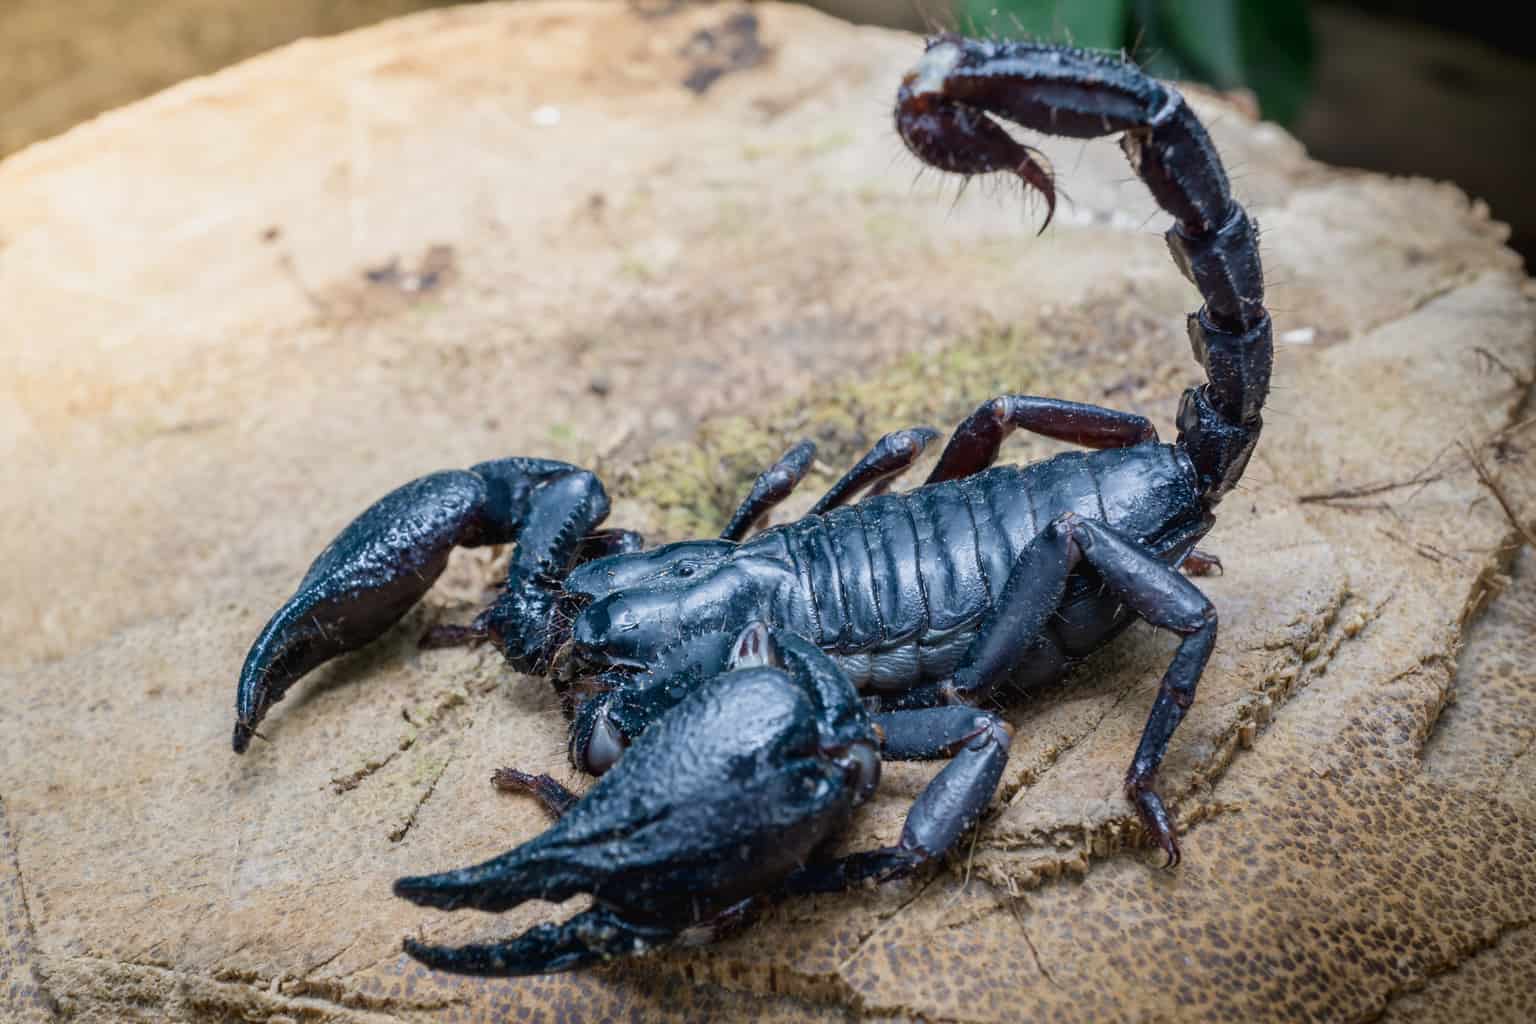 Can scorpion venom fix stiff and painful joints?